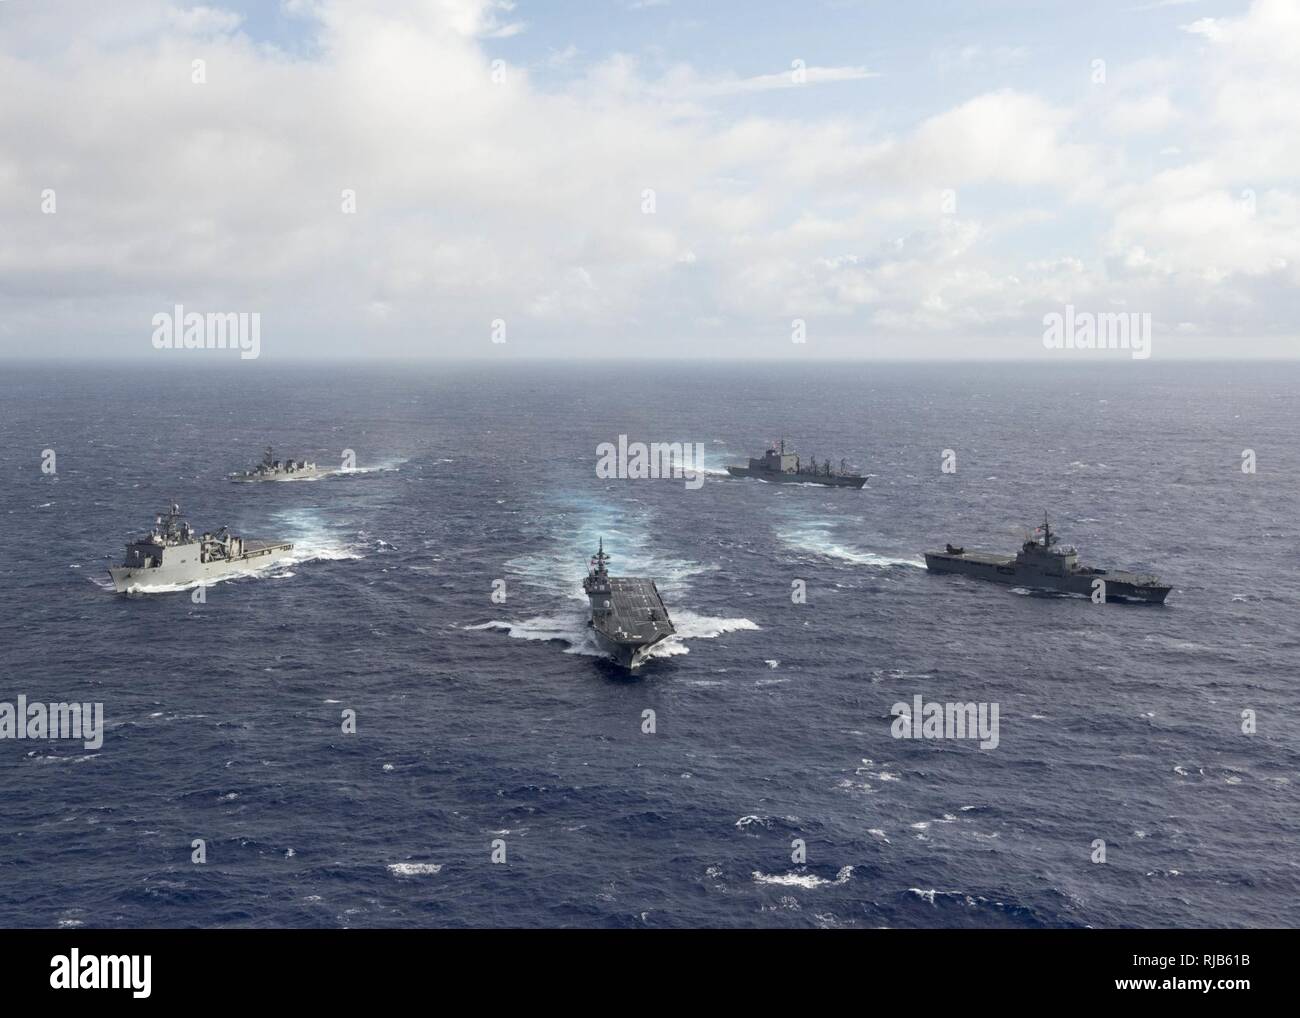 PACIFIC OCEAN (Nov. 6, 2016) - Ships participating in Keen Sword 2017 steam in formation during a photo exercise. Keen Sword 17 is a joint and bilateral field training exercise (FTX) between U.S. and Japanese forces meant to increase readiness and interoperability within the framework of the U.S. – Japan alliance. Stock Photo